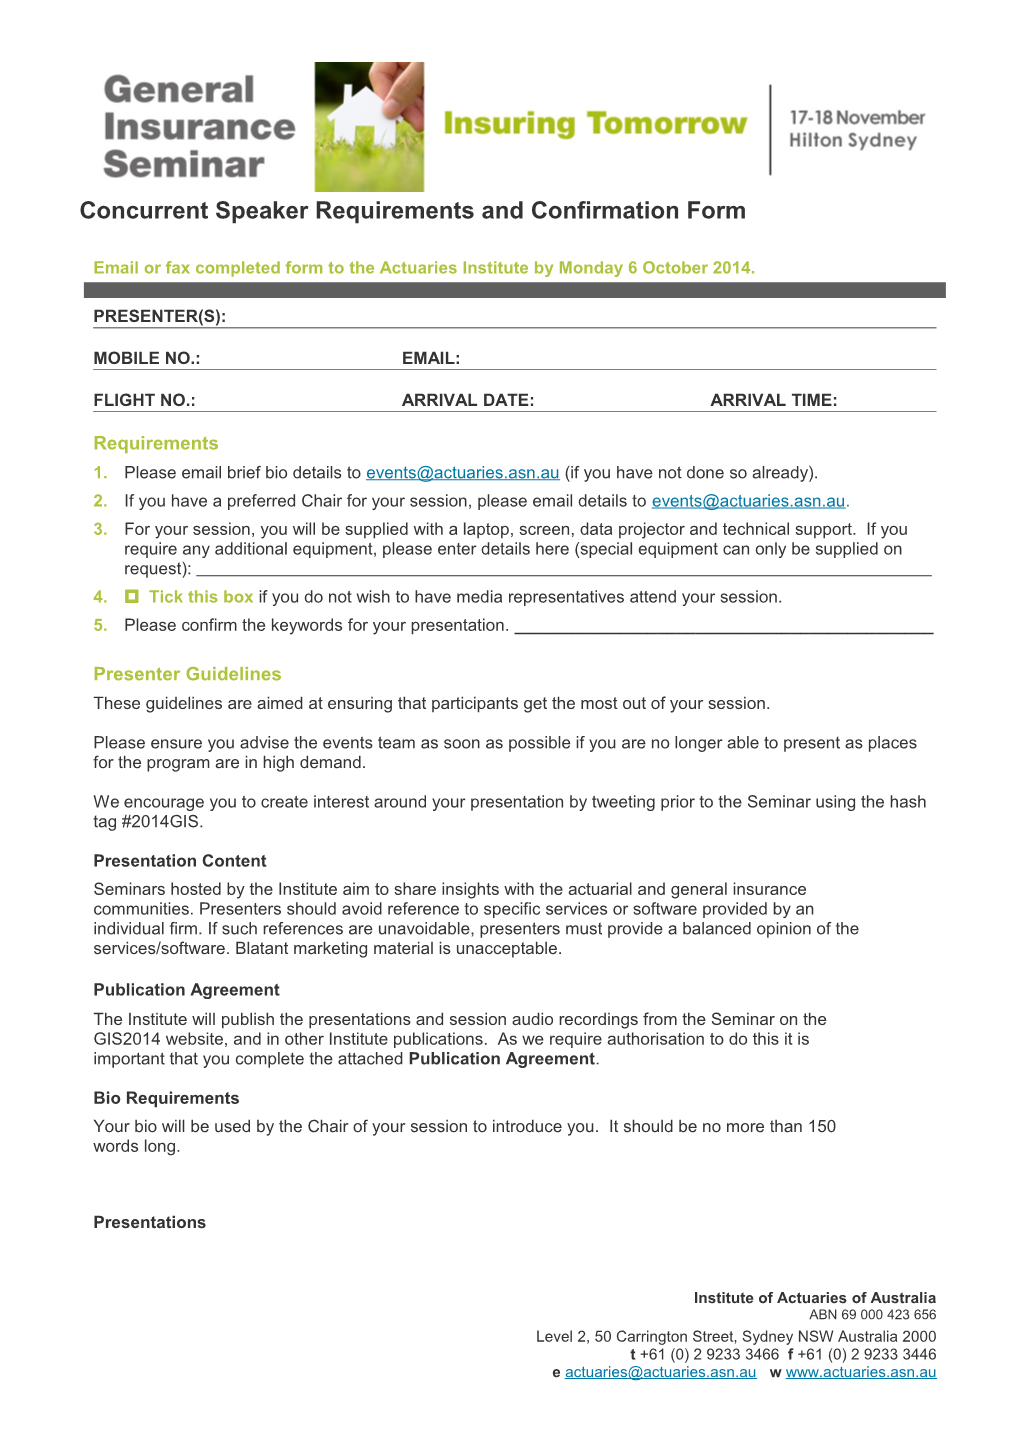 Email Or Fax Completed Form to the Actuaries Institute by Monday 6 October 2014